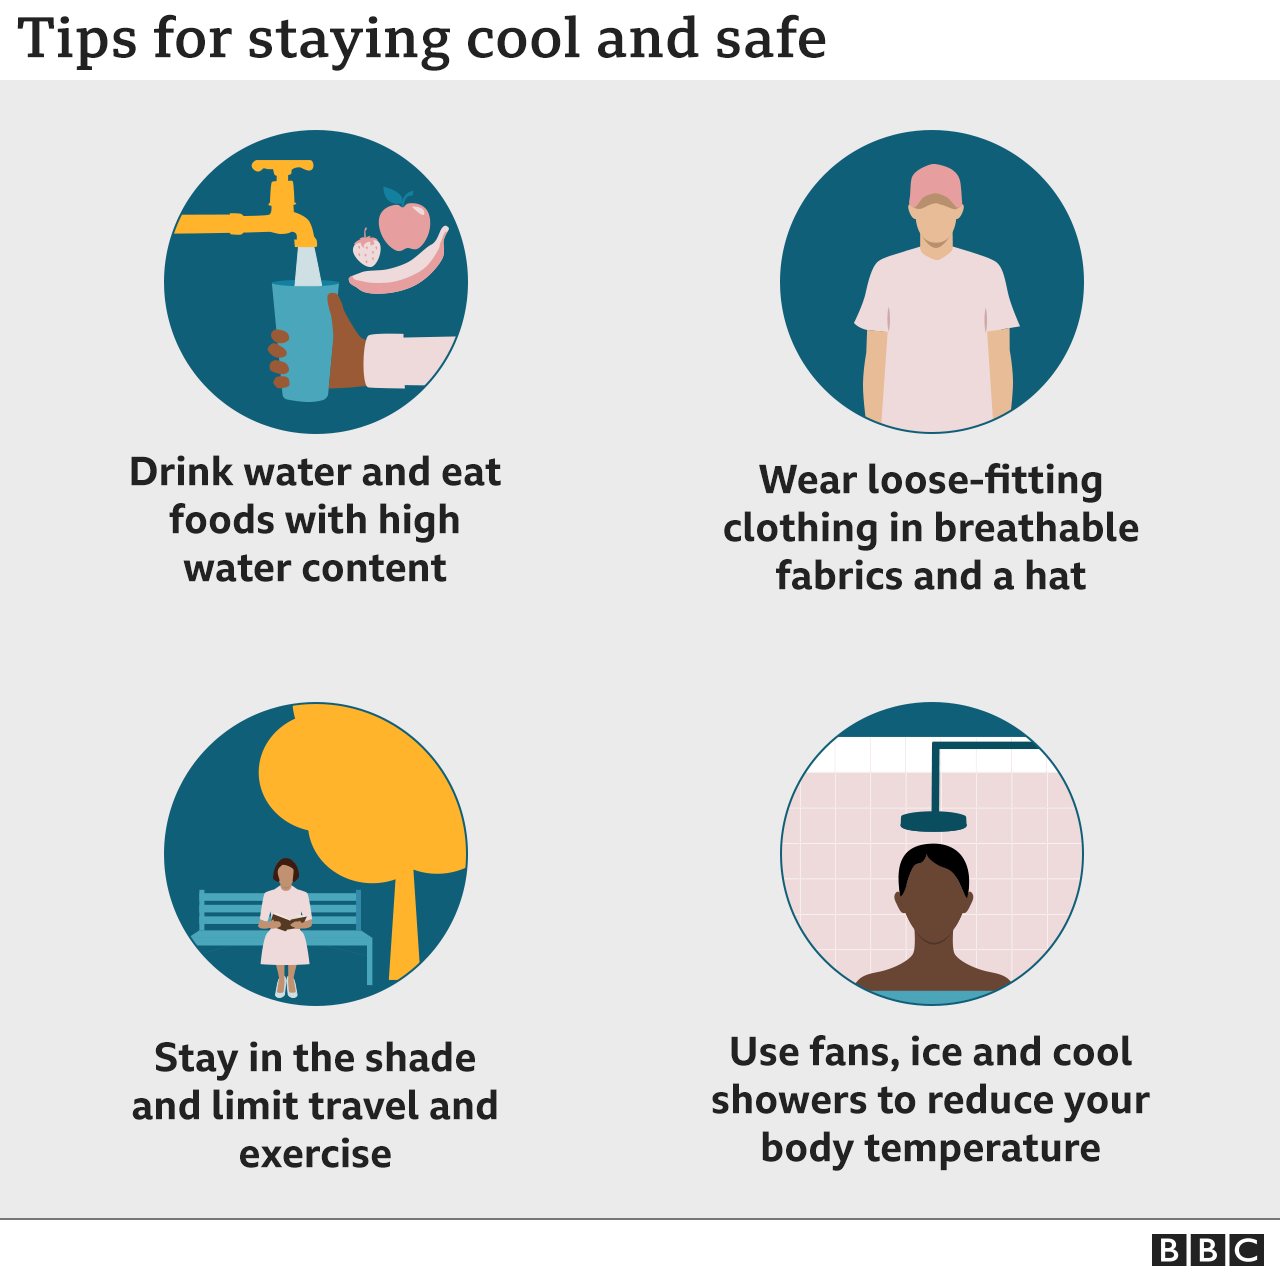 Graphic showing tips for staying cool: drink water; eat foods with high water content; stay in the shade; limit travel and exercise; wear breathable fabrics and a hat; draw curtains and blinds to cool rooms; use fans, ice and cool showers to bring your body temperature down.